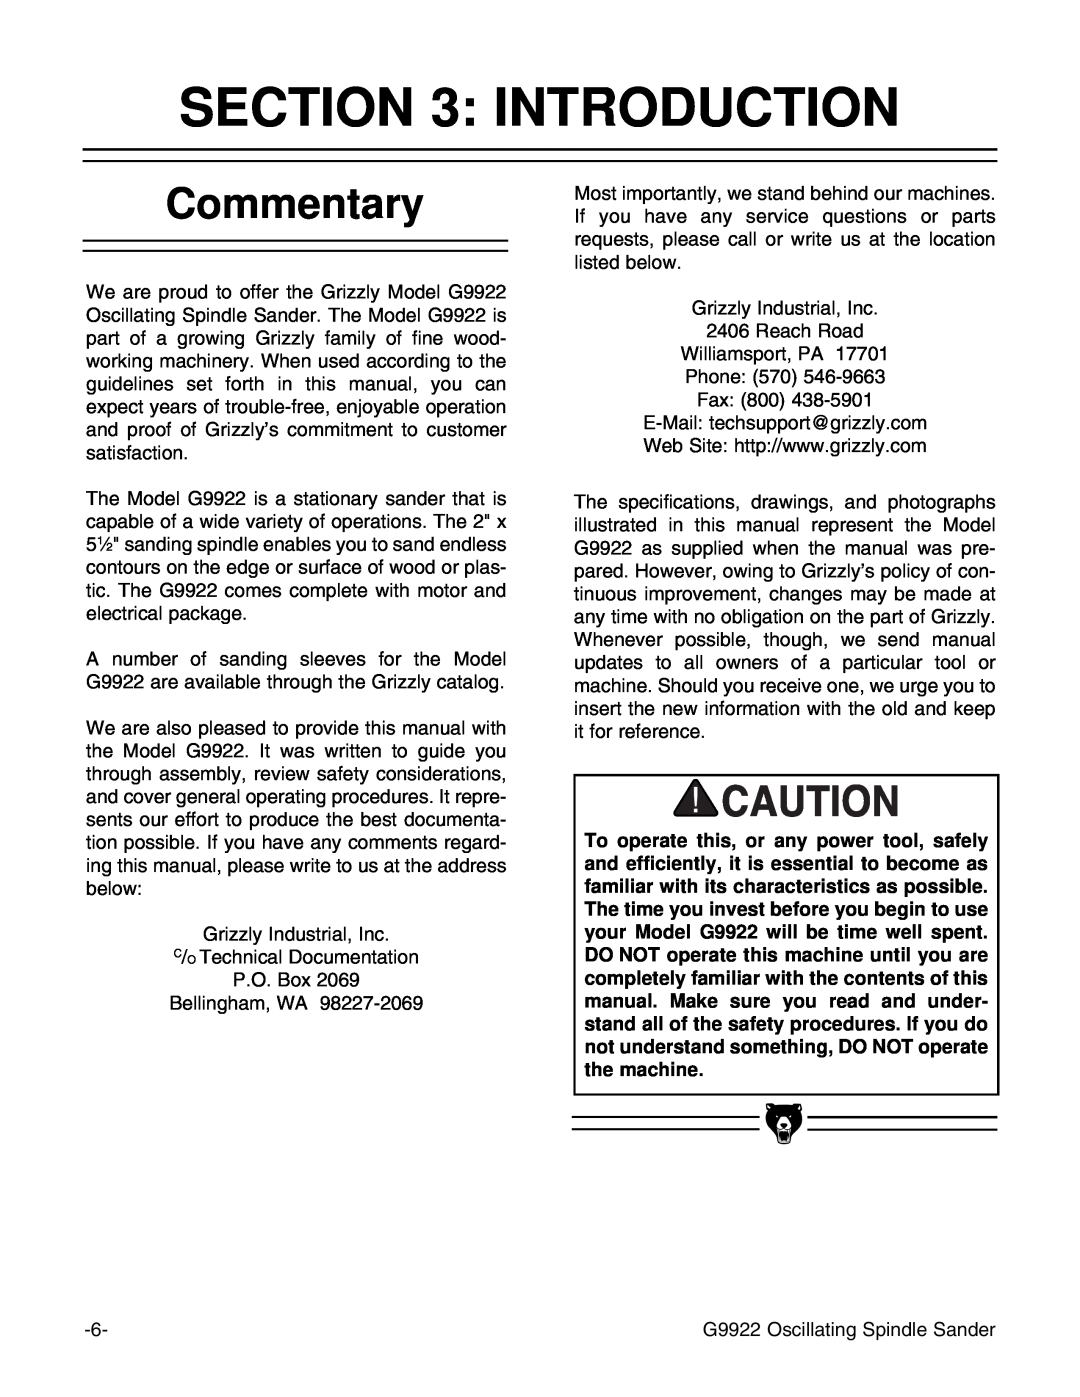 Grizzly G9922 instruction manual Introduction, Commentary 